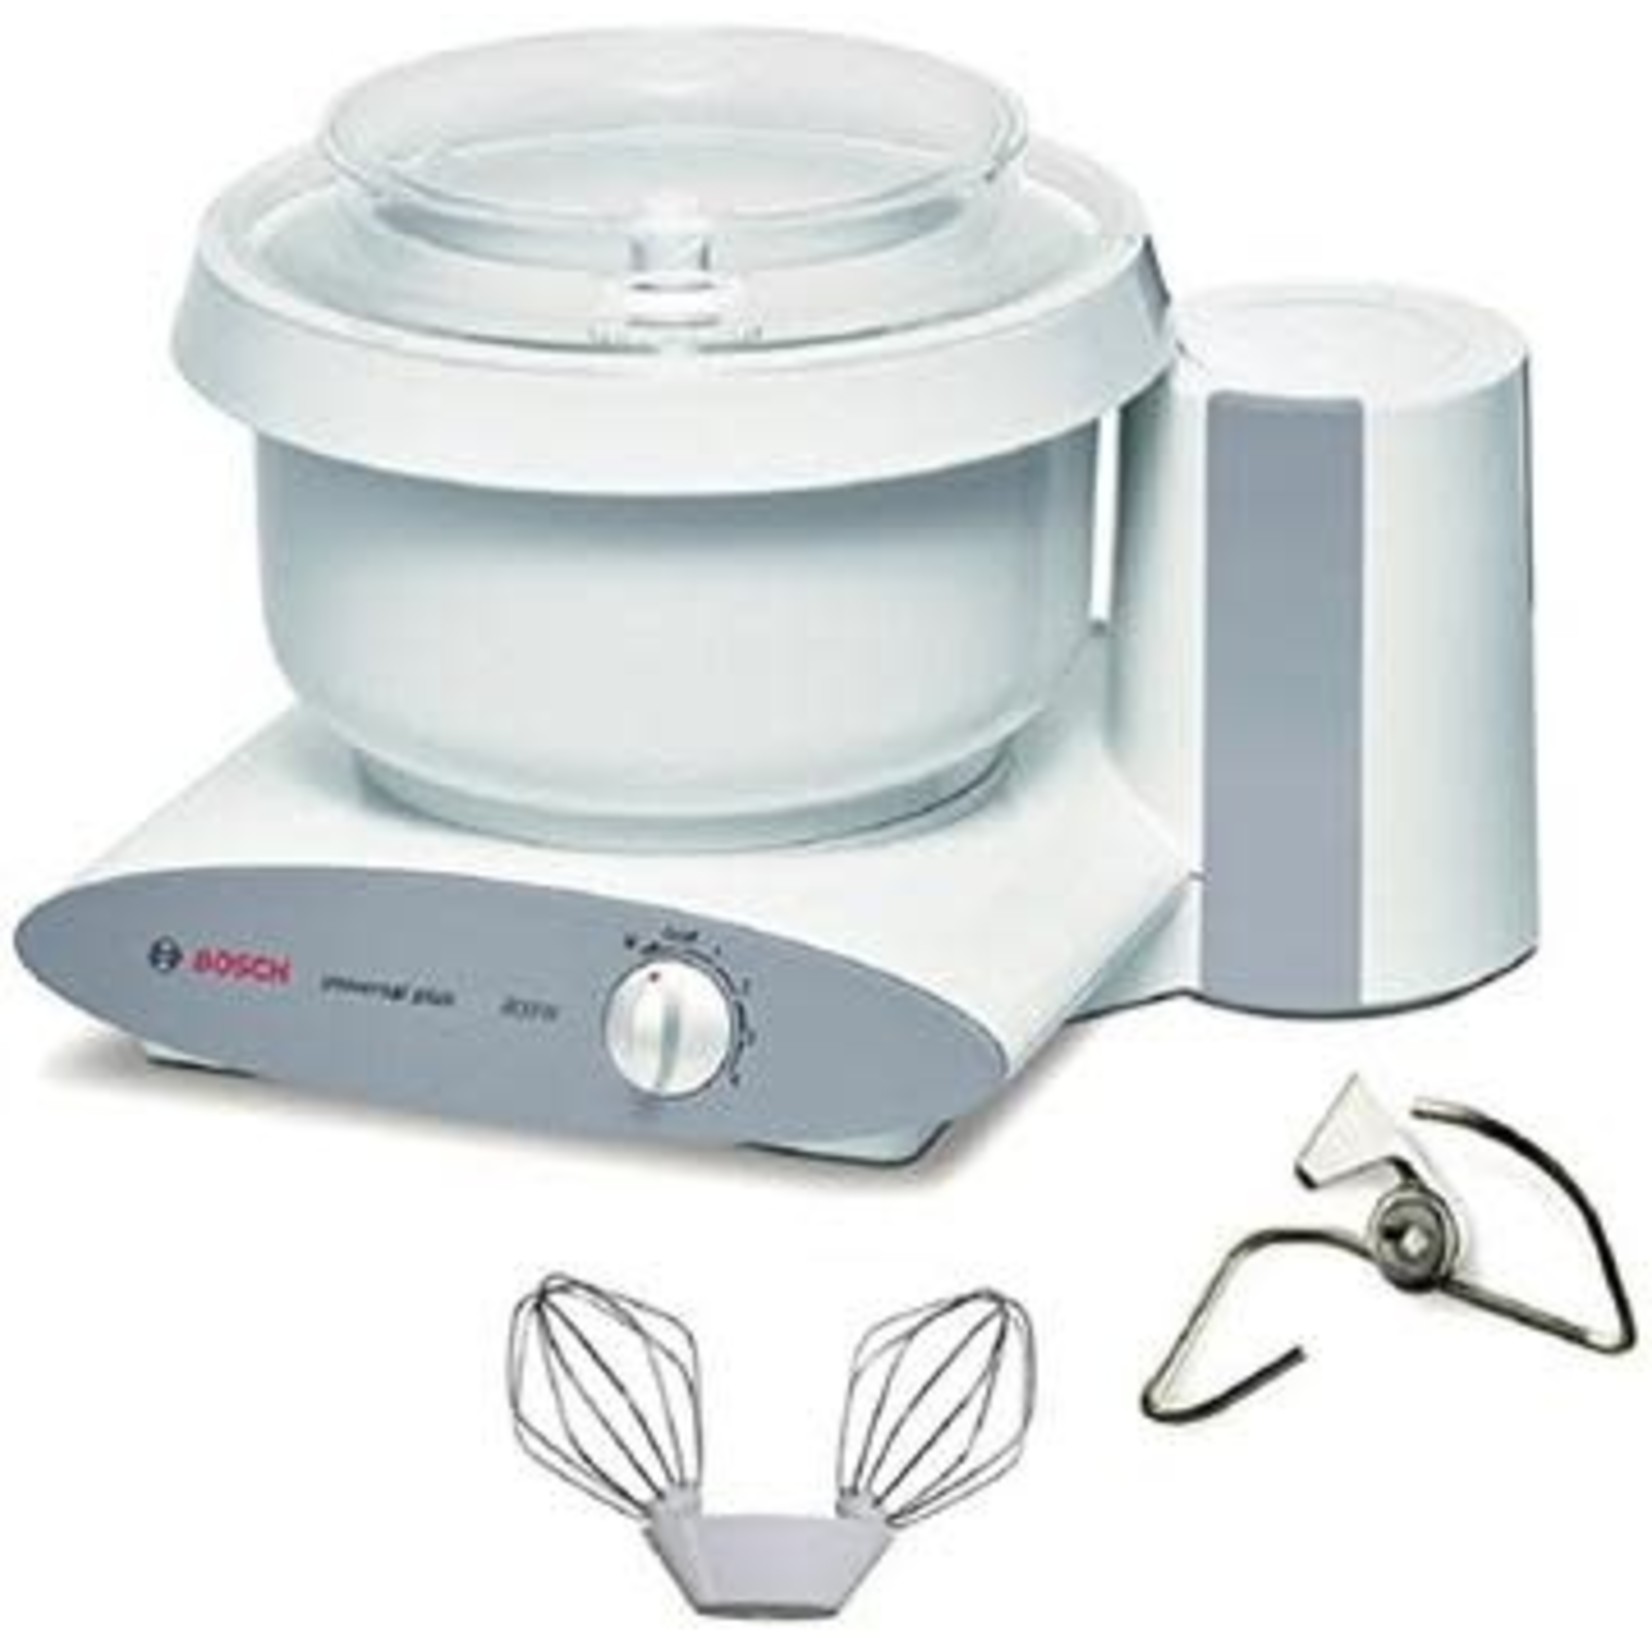 TWS Bosch Universal Plus Mixer With Stainless Steel Challah Bowl